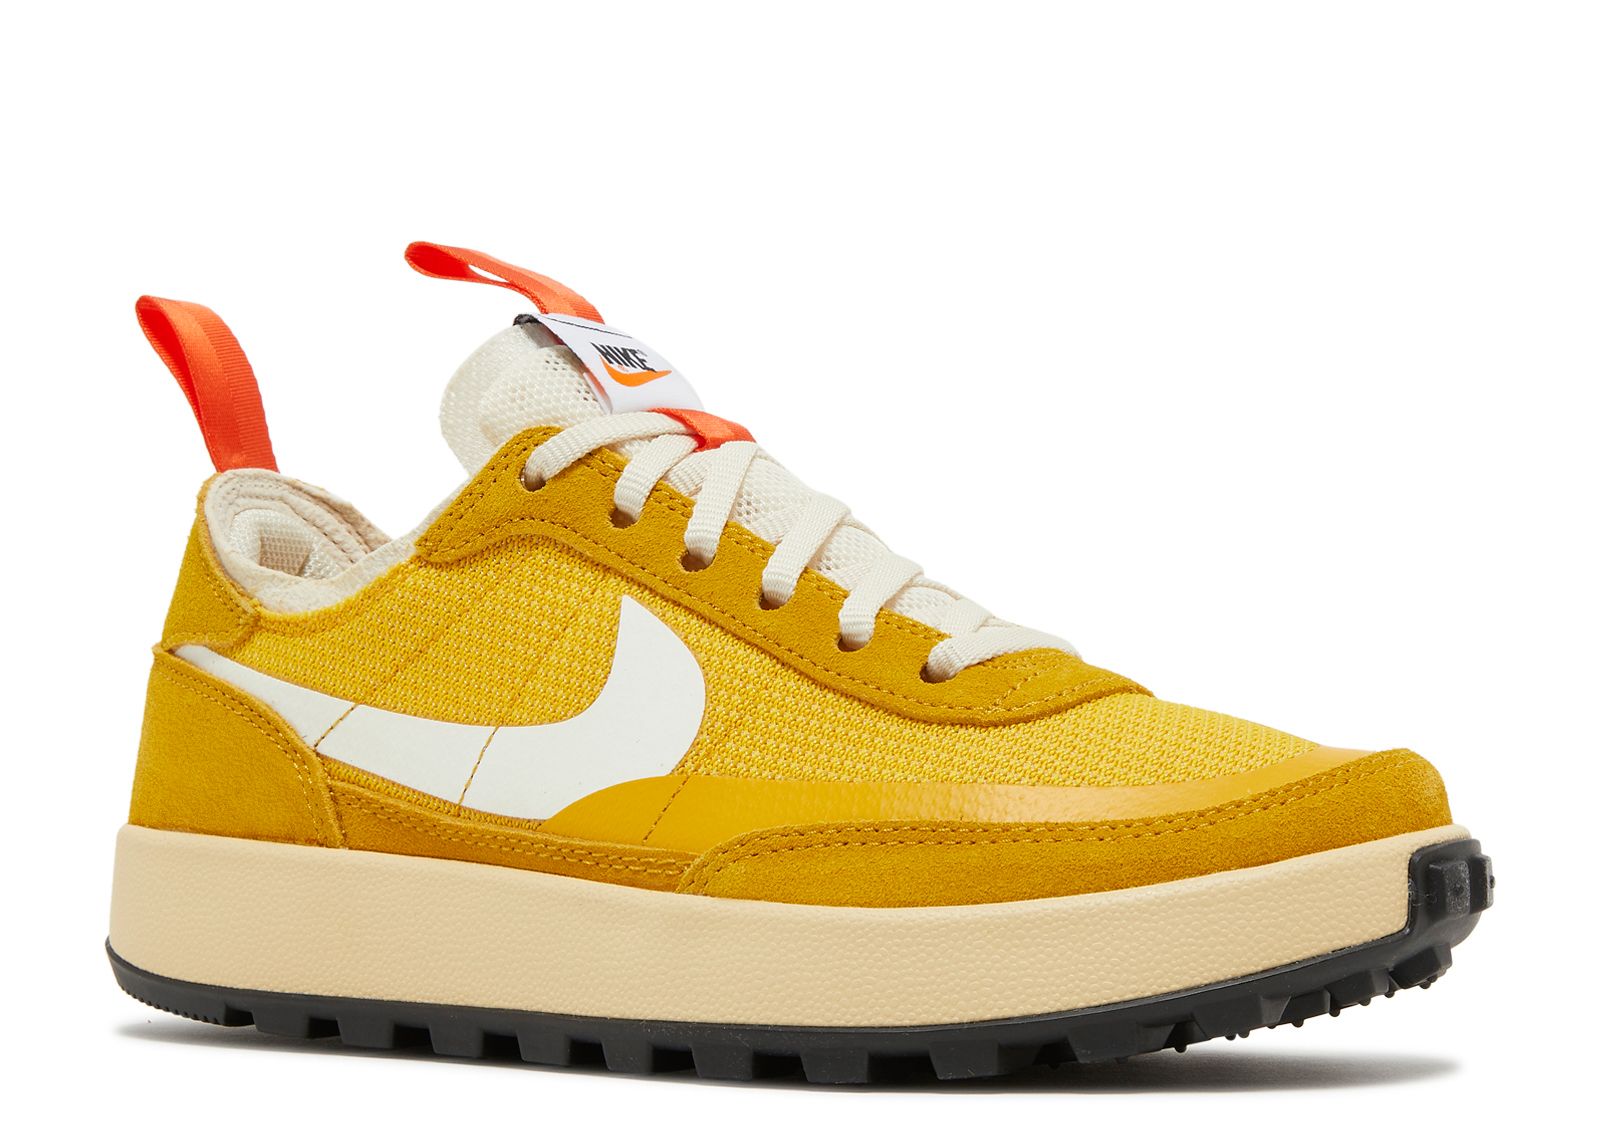 Where to buy Tom Sachs x NikeCraft General Purpose Shoe “Brown” colorway?  Price and more details explored